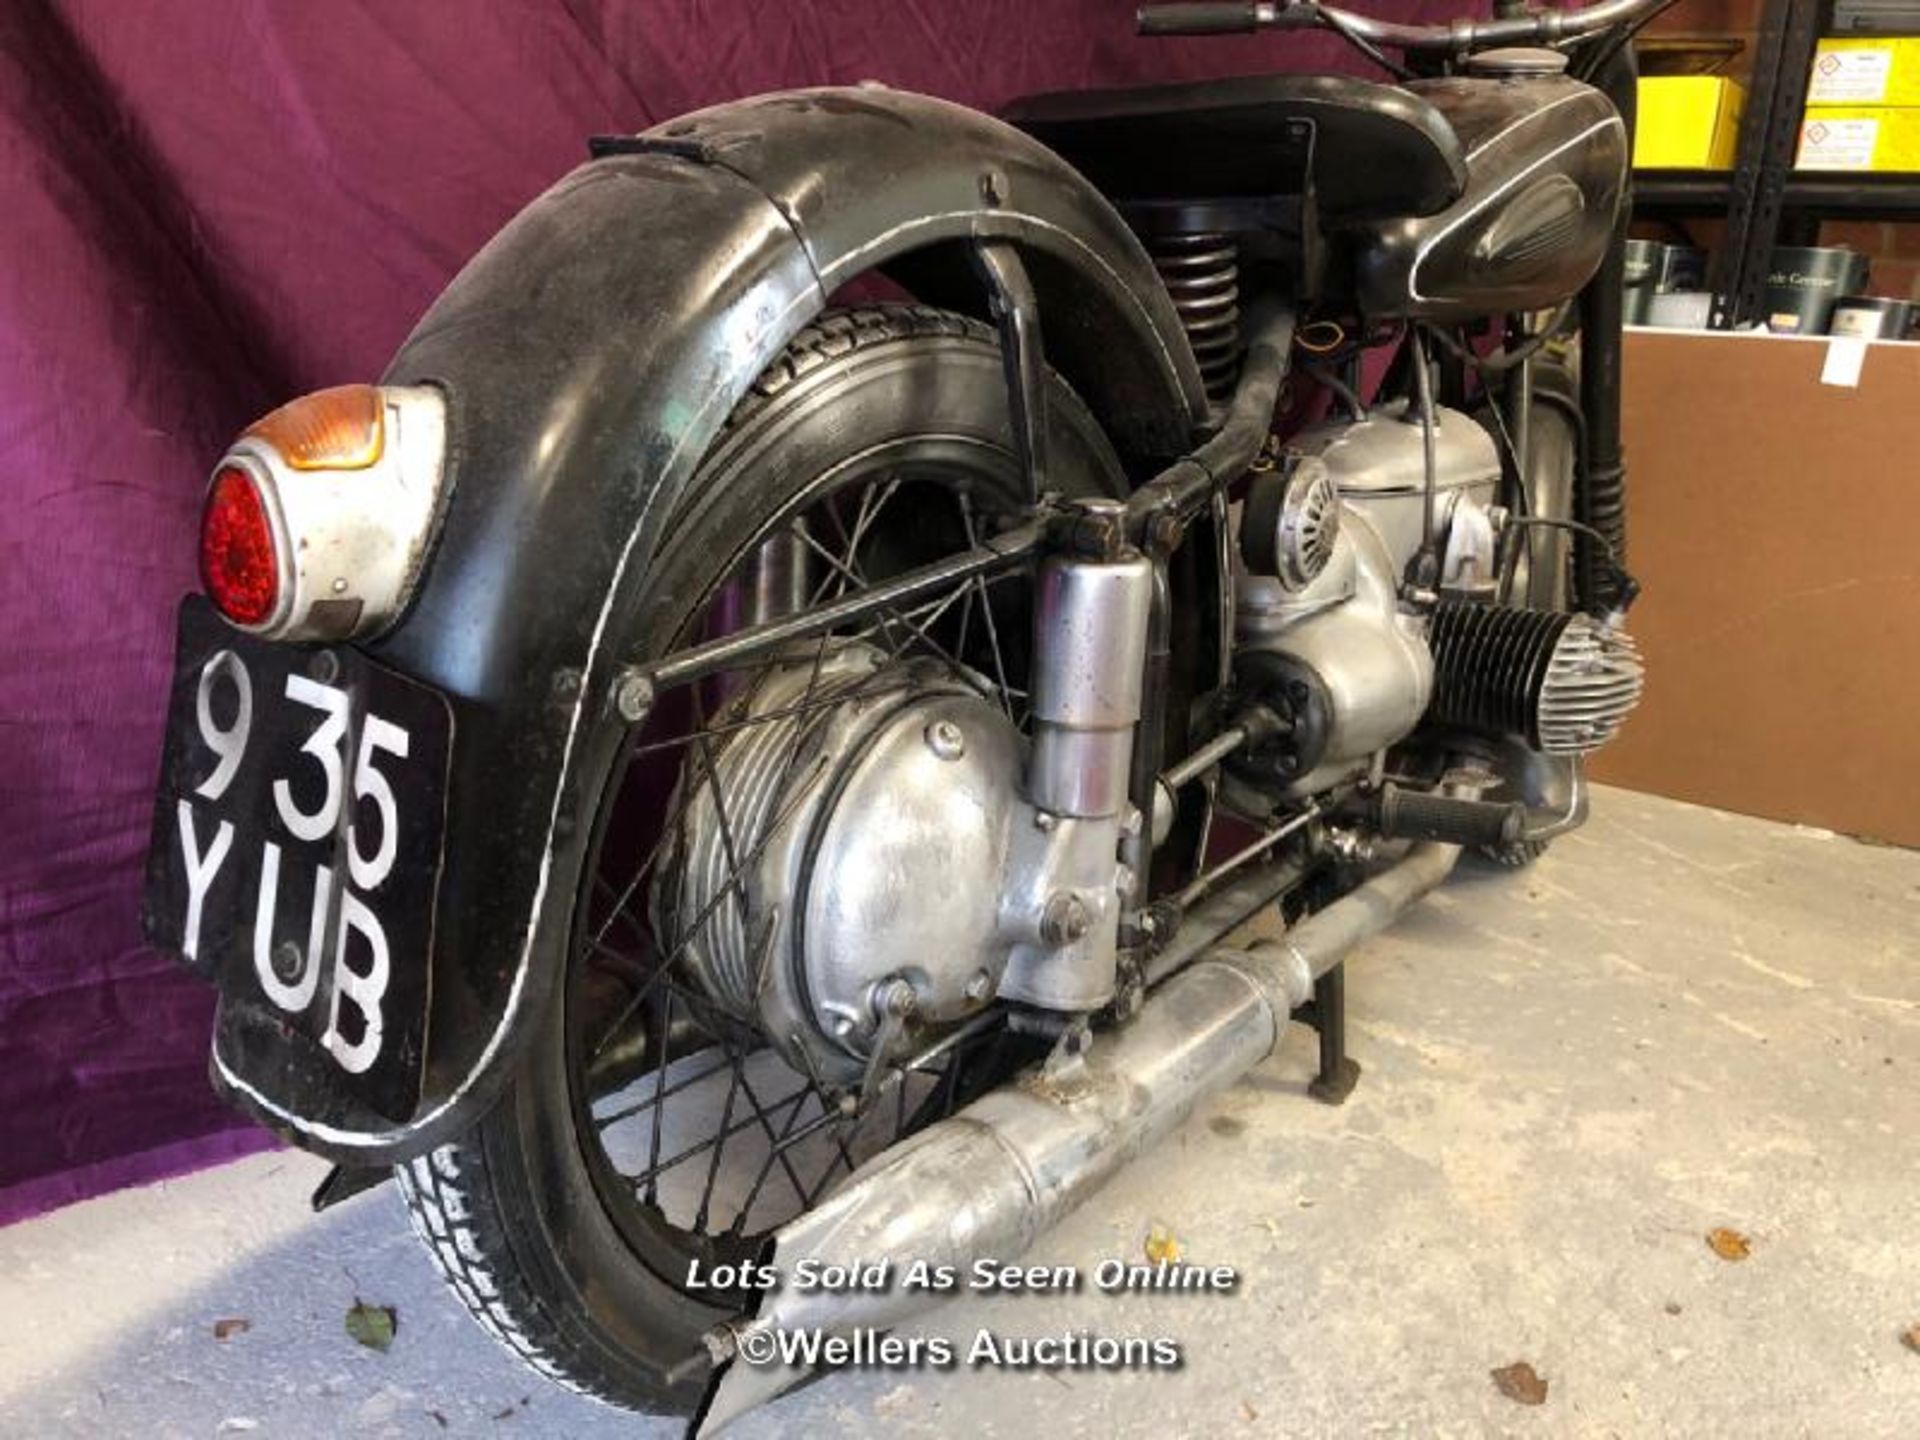 IFA 350 HORIZONTALLY OPPOSED TWIN CYLINDER 1954 MOTORCYCLE, TAX EXEMPT, RUNS WITH GOOD - Image 3 of 12